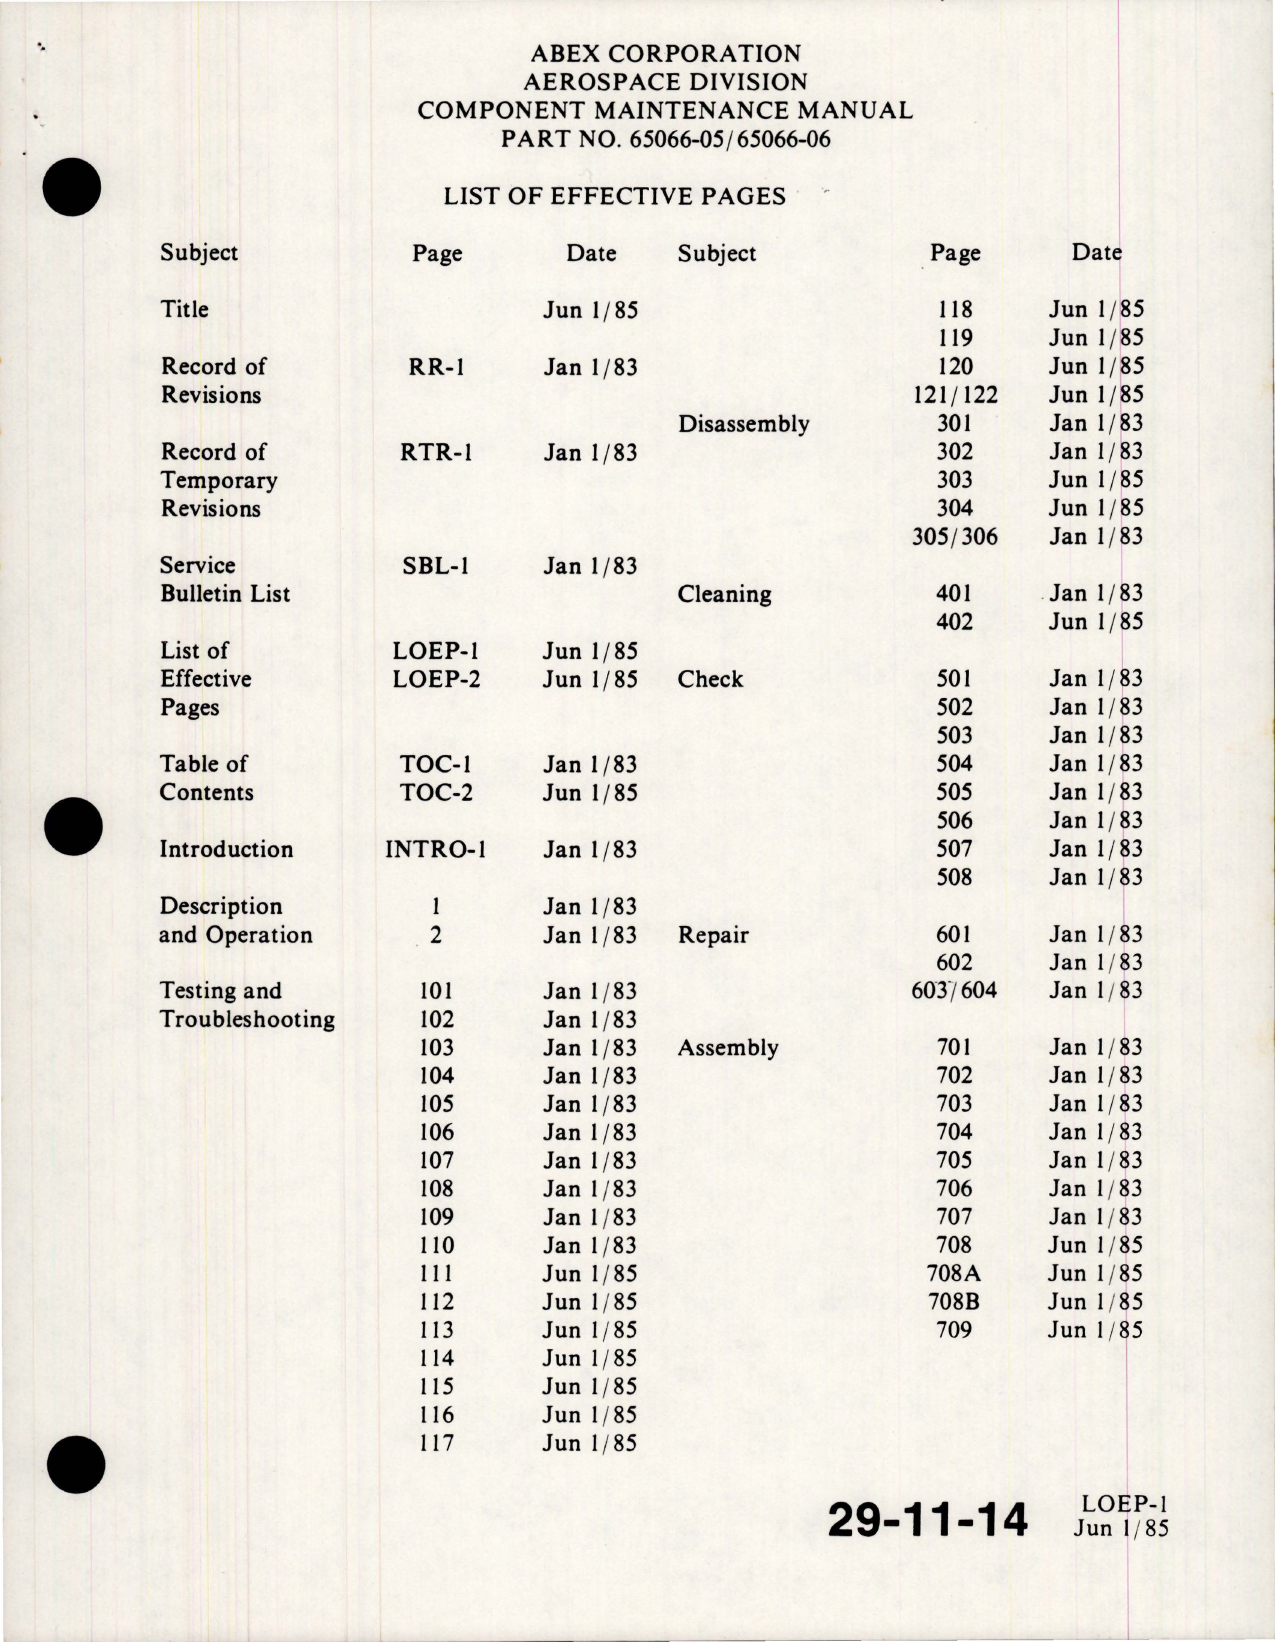 Sample page 7 from AirCorps Library document: Maintenance Manual w Parts List for Variable Delivery Hydraulic Pump - Parts 65066-05 and 65066-06